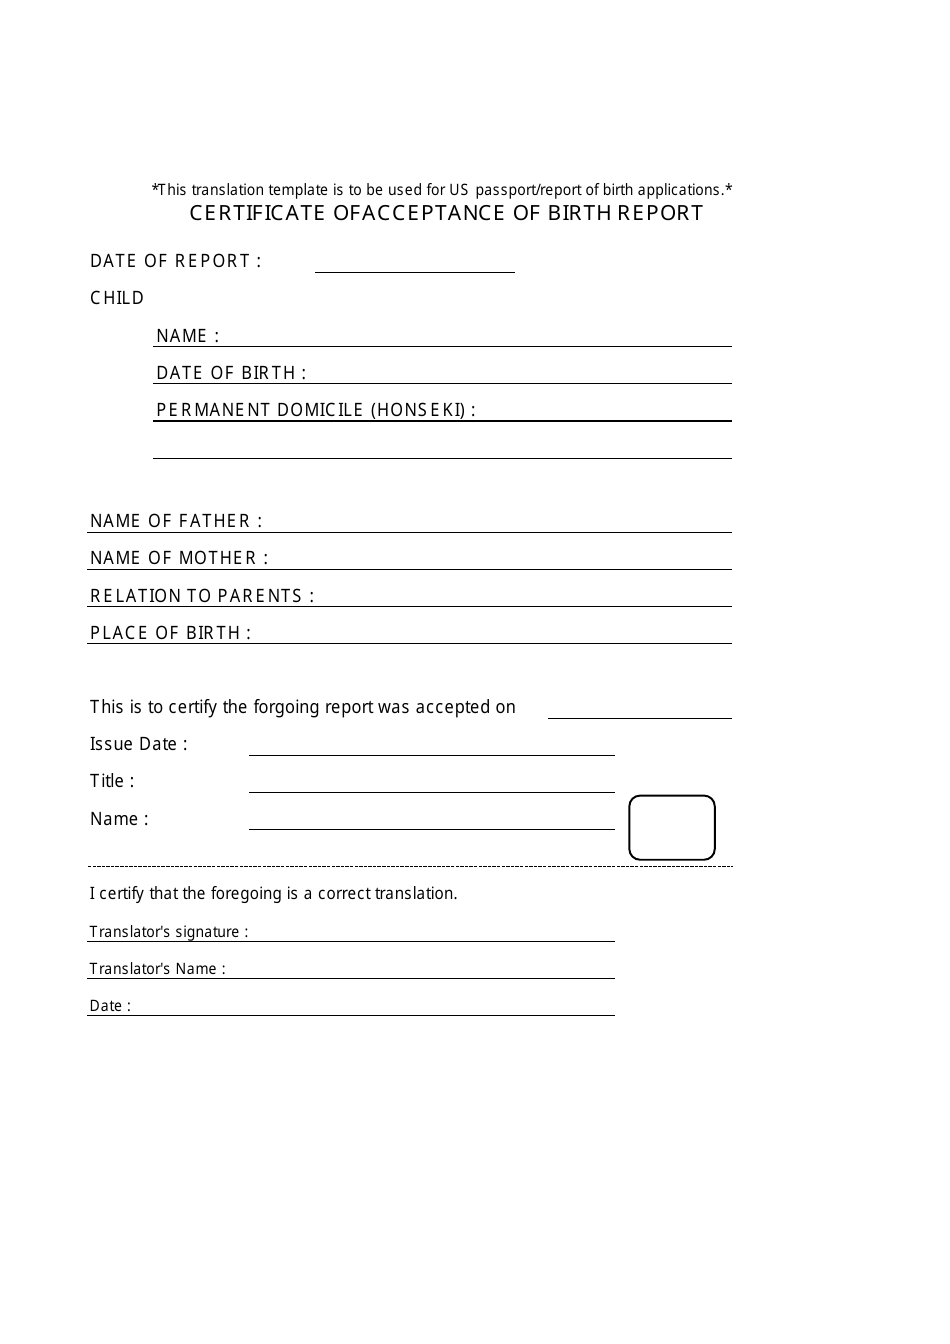 Certificate of Acceptance of Birth Report Download Printable PDF Throughout Certificate Of Acceptance Template